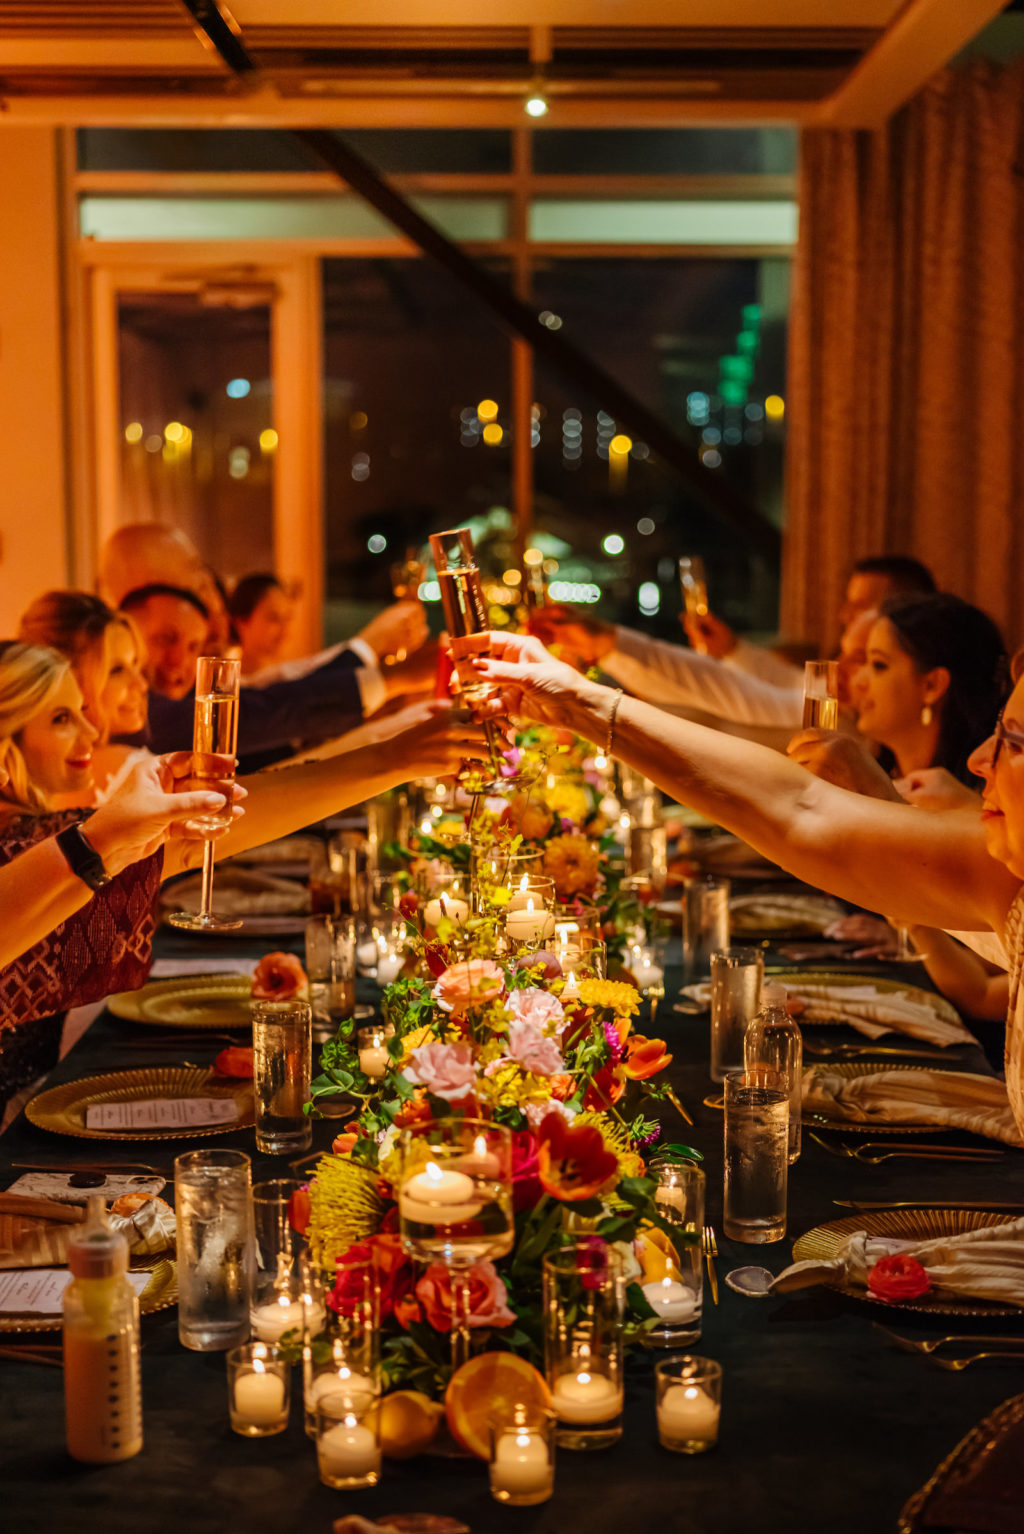 Guests Cheering at Long Feasting Table During Moroccan Inspired Wedding Elopement Reception Dinner, Dark Green Tablecloths, Floating Candle Votives, Colorful and Bright Long Floral Garland Arrangement, Pink, Yellow, Fuschia, Orange Florals and Greenery | Tampa Bay Wedding Planner UNIQUE Weddings + Events | Wedding Rentals Kate Ryan Event Rentals